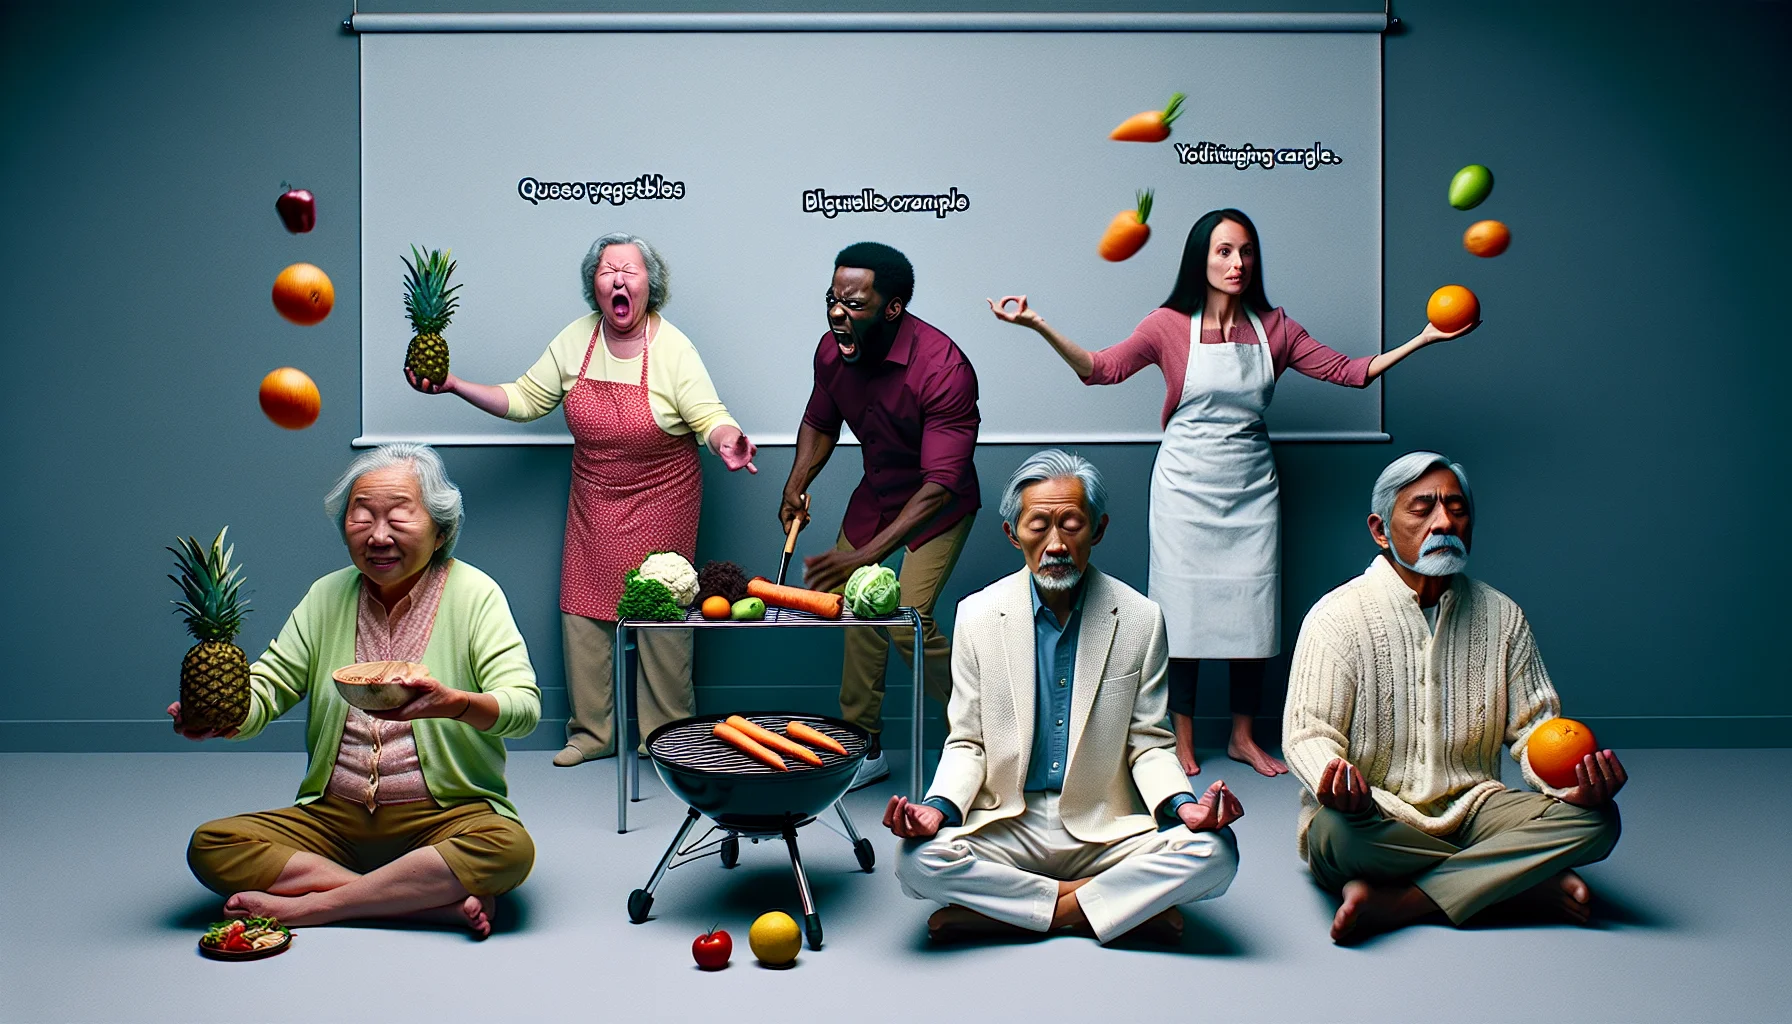 Visualize a humorous scene in a realistic setting where elderly individuals from different descents -- an East Asian woman, a Black man, a Caucasian lady, and a South Asian gentleman -- are engaged in peculiar situations around the theme of diet and healthy eating. The East Asian woman might be queuing raw vegetables on a BBQ, the Black man could be attempting to blend a whole pineapple, the Caucasian lady might be juggling oranges, and the South Asian man could be meditating with carrots levitating around him.